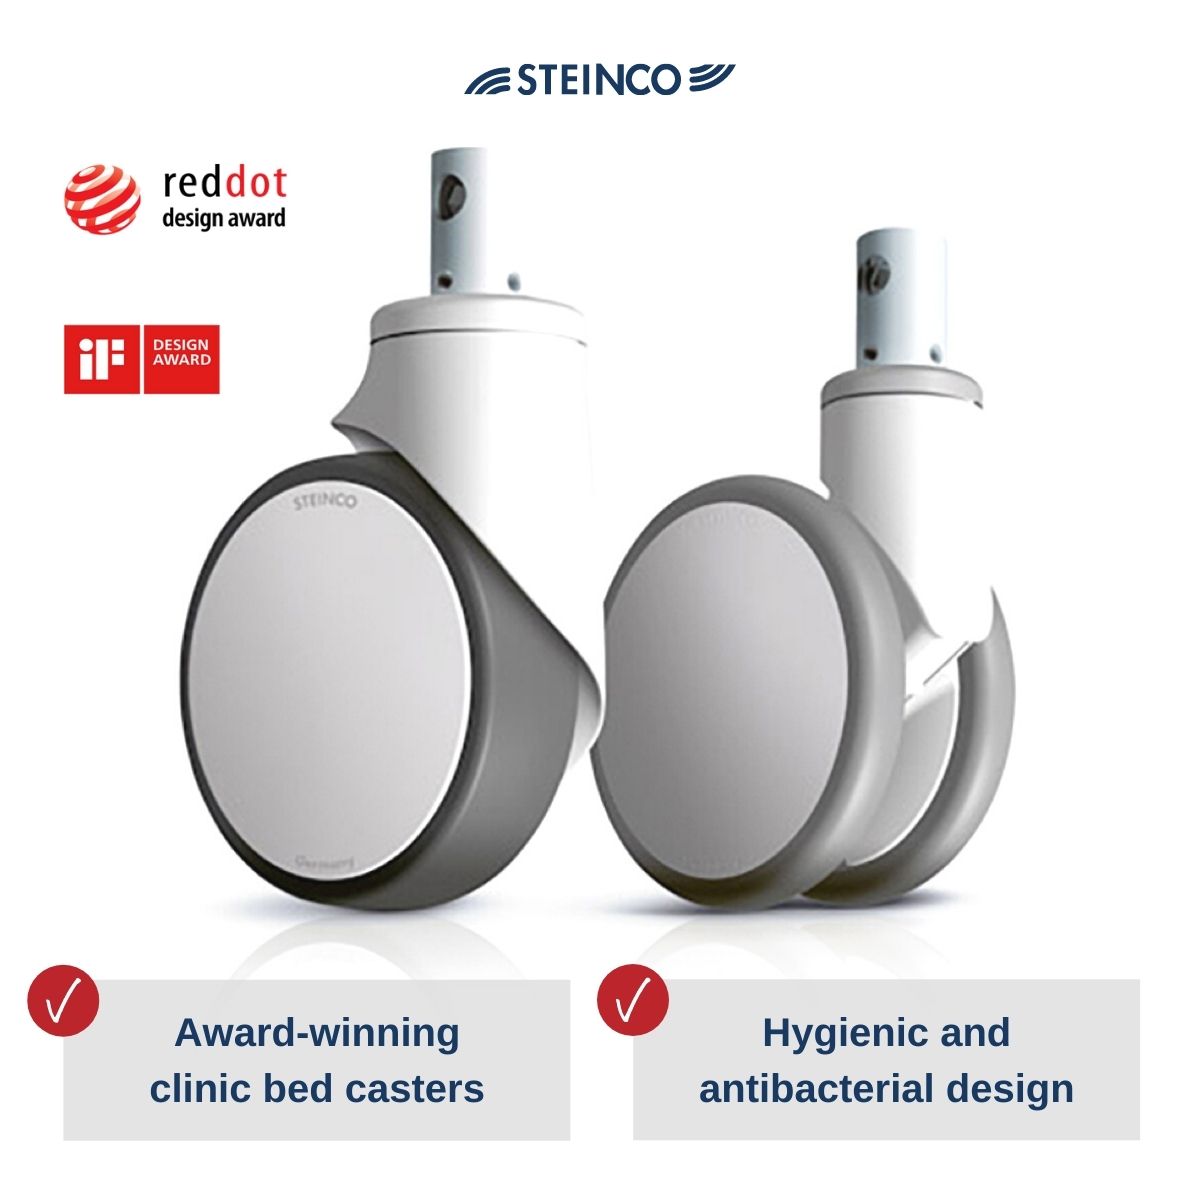 Hospital bed castors in washable and electrically conductive design with central locking